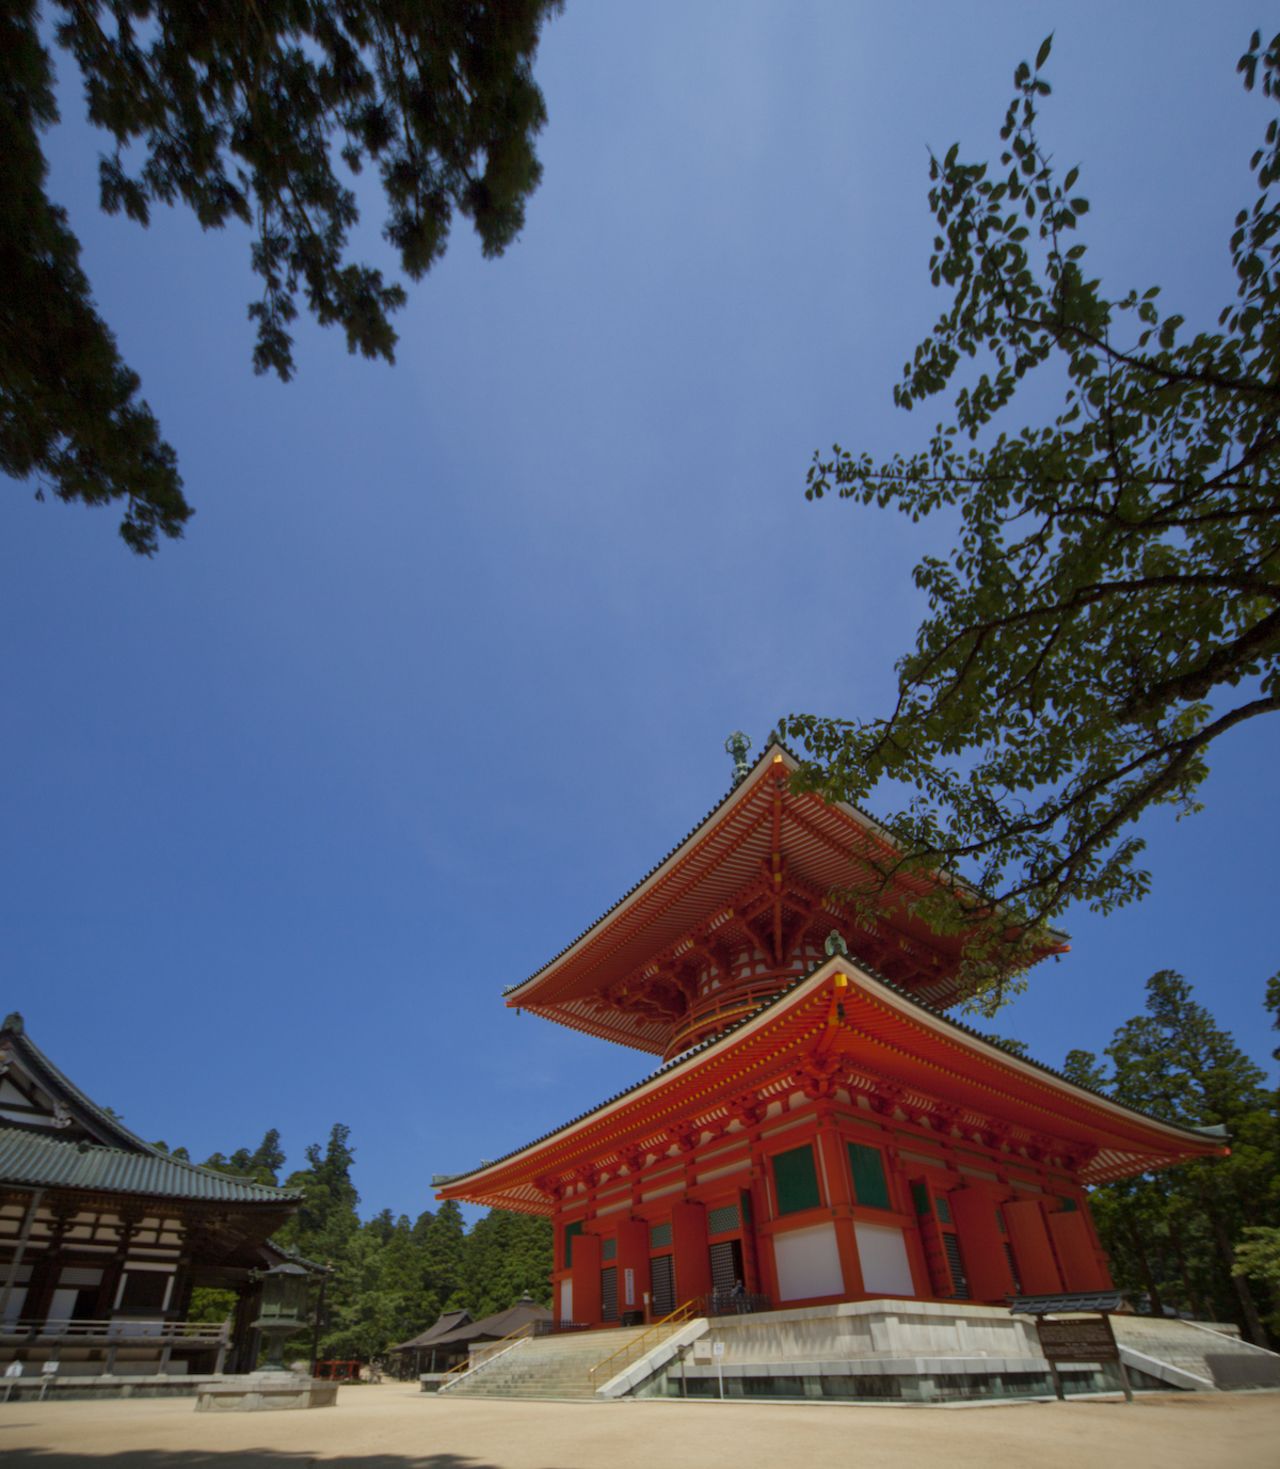 Danjo Garan, one of Koyasan's holiest sites, is made up of 20 different structures, from pagodas to Shinto torii gates. 